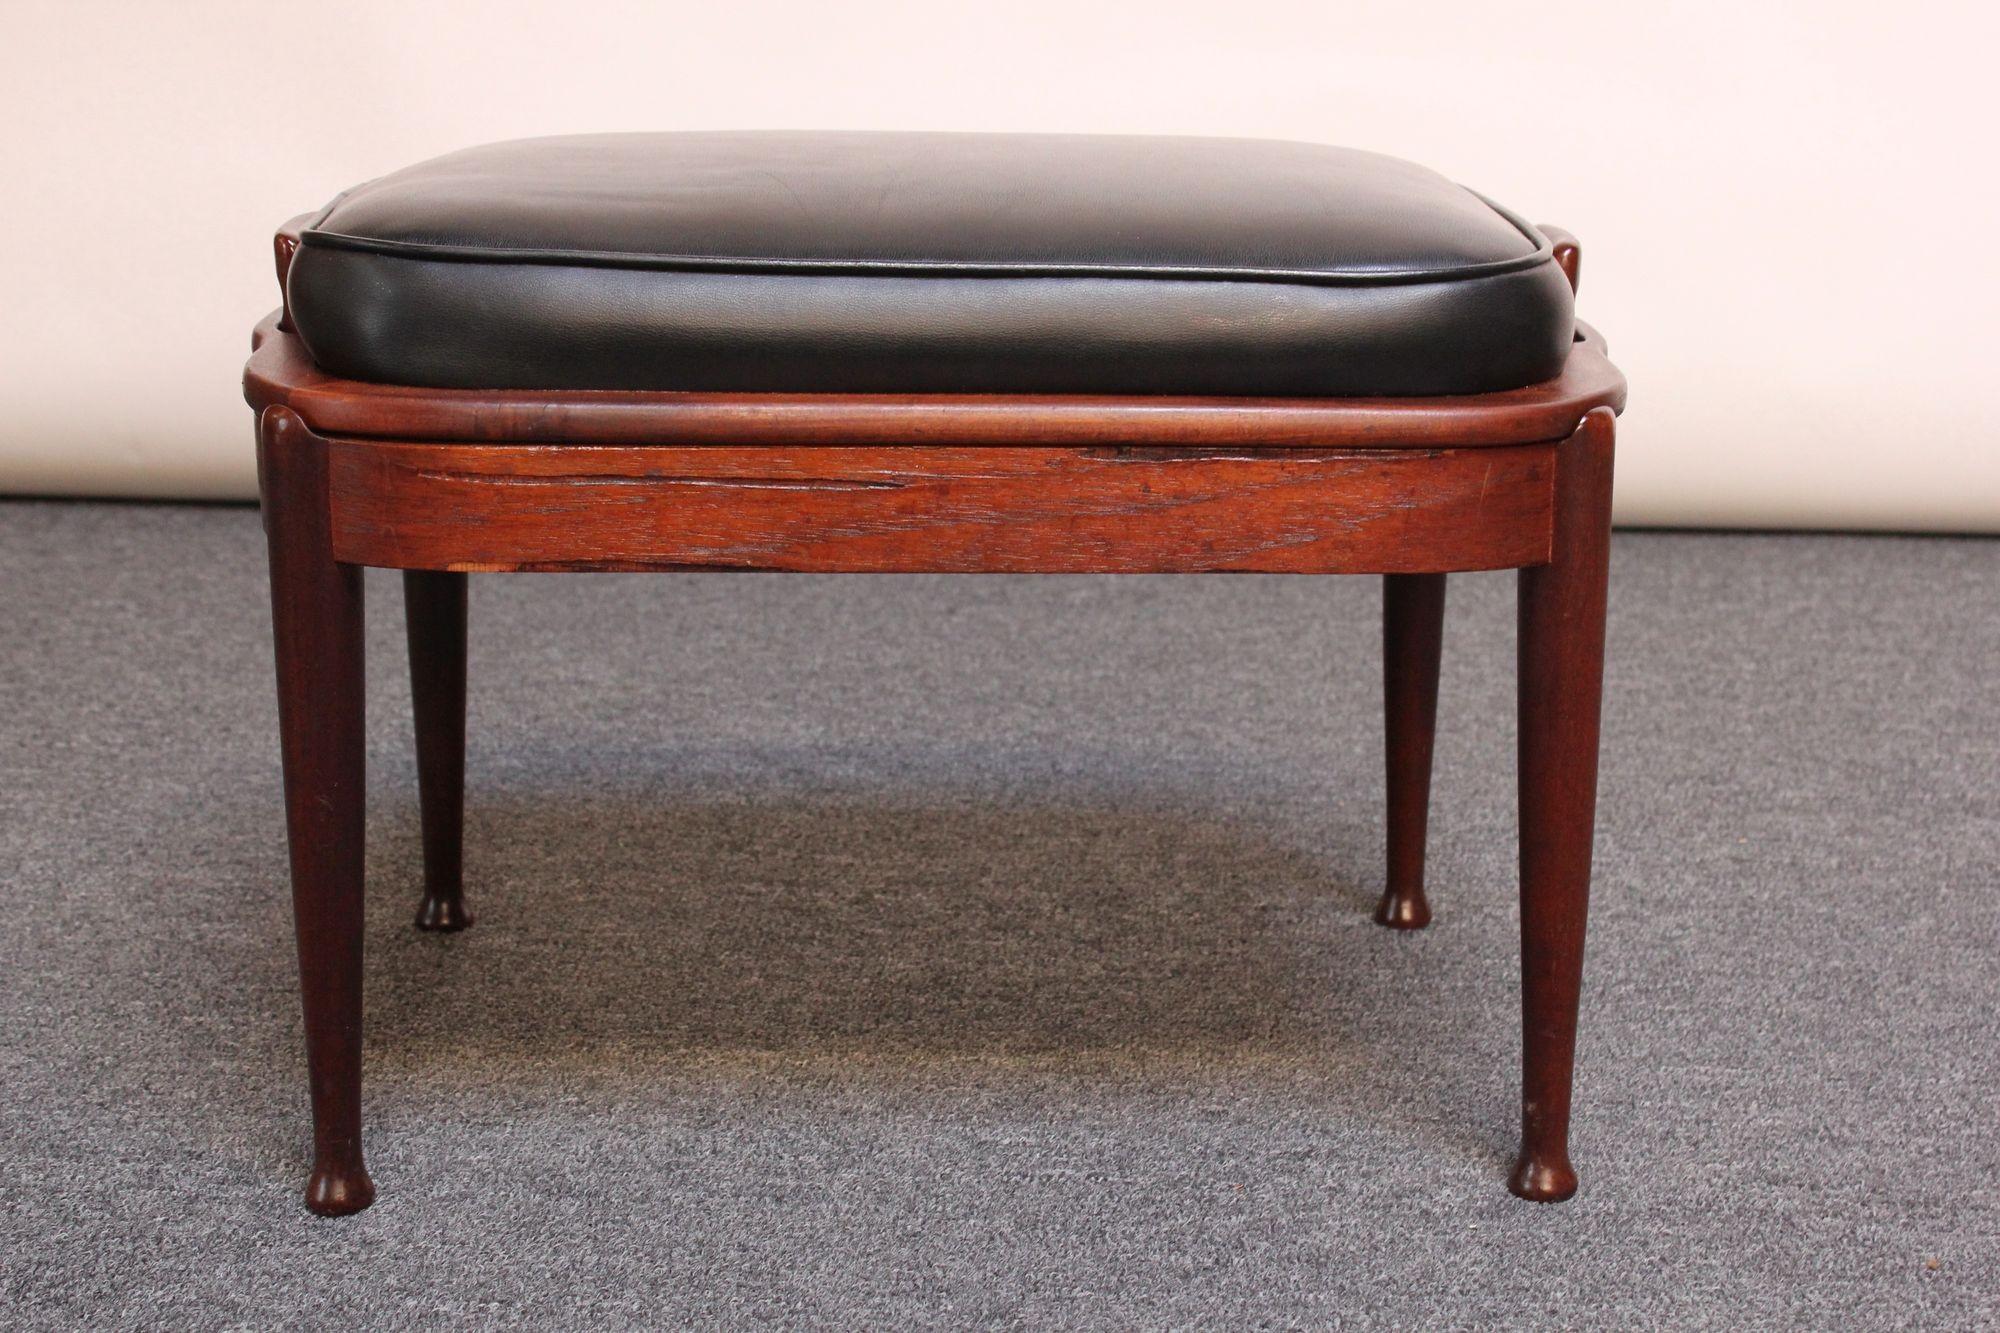 Mid-Century Danish Modern ottoman in stained teak with black vinyl upholstered seat / cushion (ca. 1960s). Cushion is in good, vintage shape, and teak has been newly refinished; only light wear remains, as shown.
Measures: H: 15.5